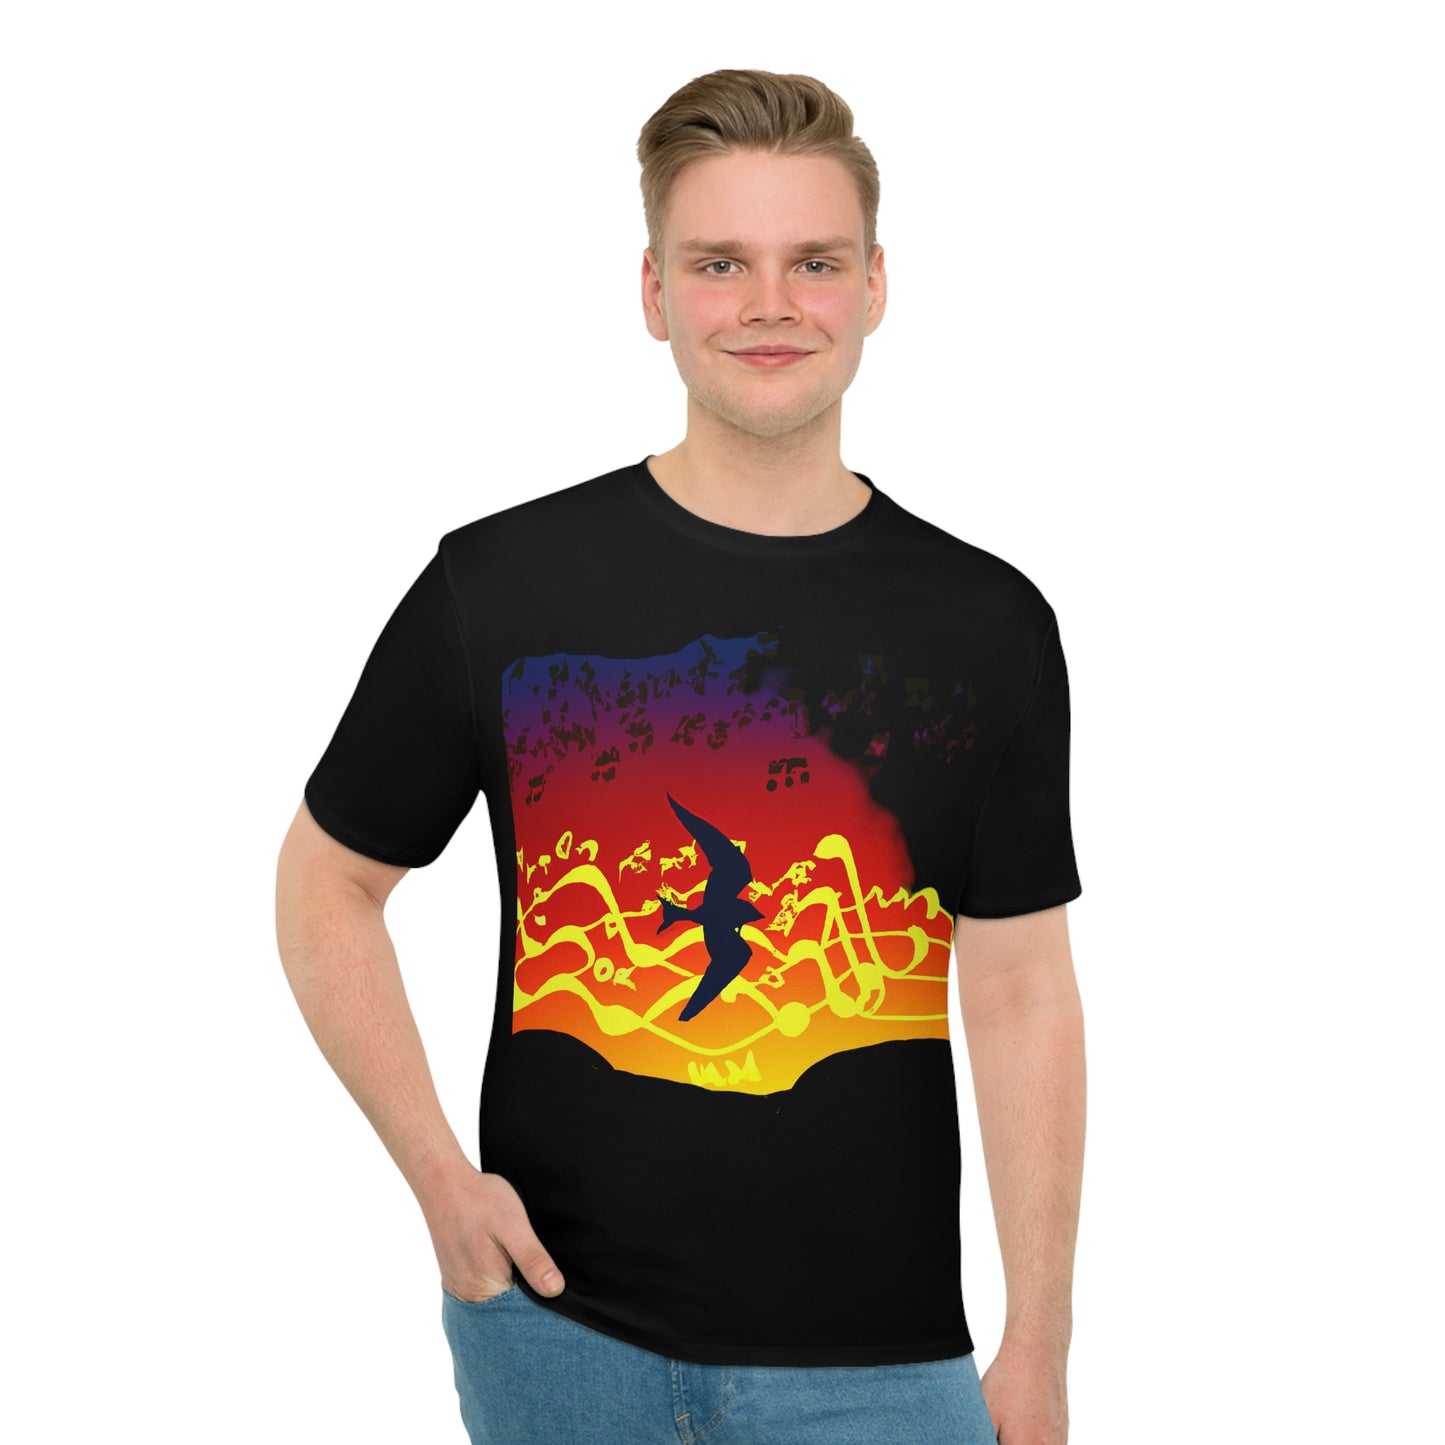 The Mystic Sounds Of Ambient Synths Men's Black T-Shirt